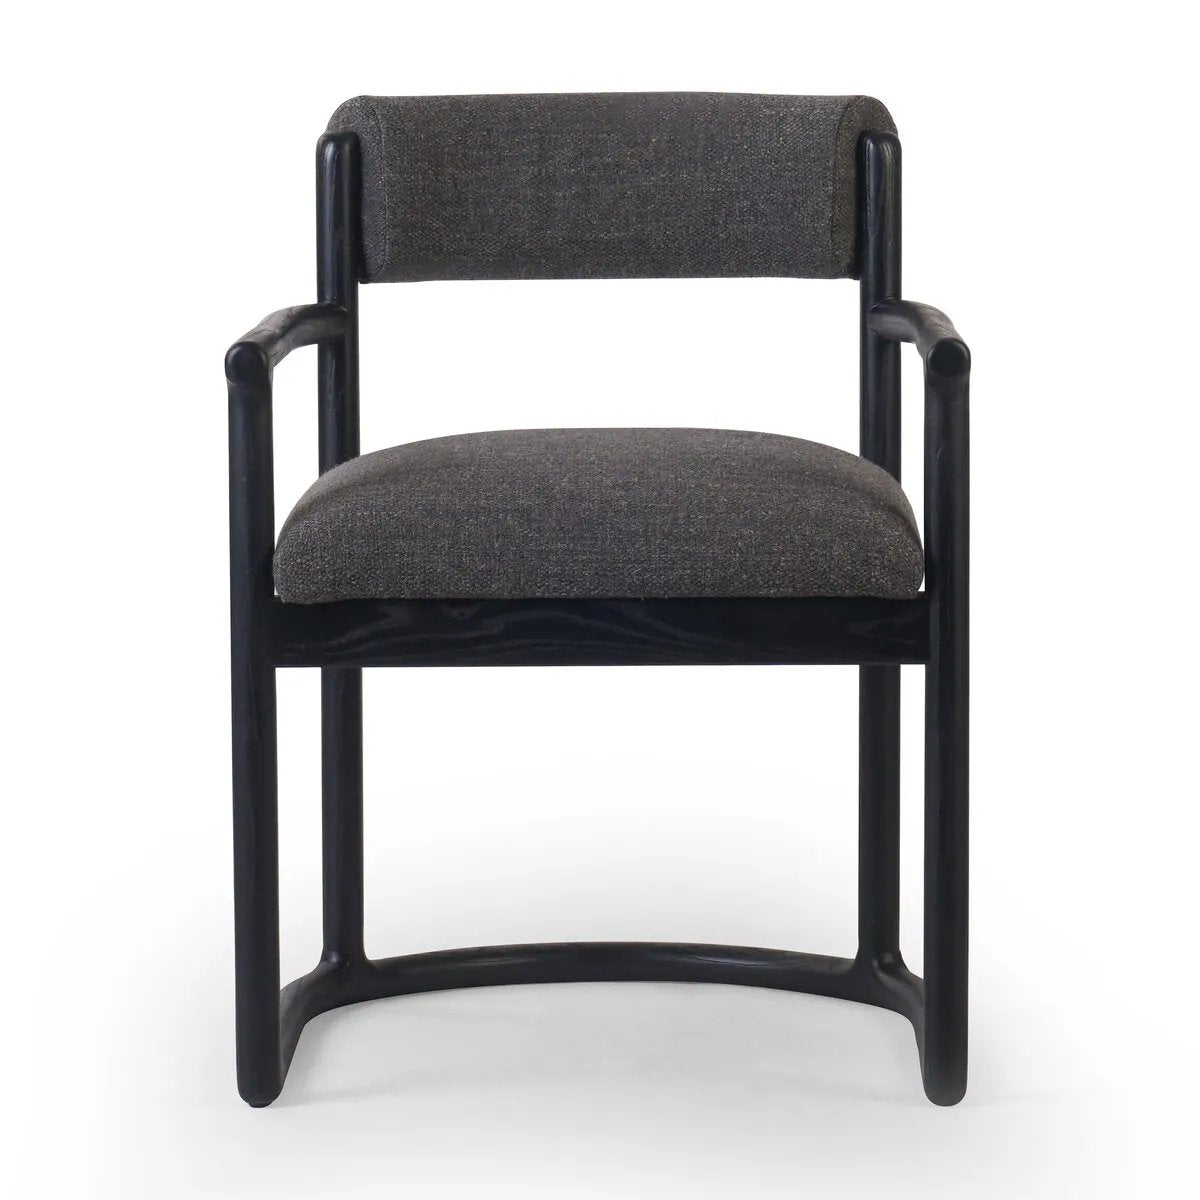 This Clarice Thames Ash Dining Chair is a versatile and stylish addition to your dining space. Its high-quality construction and sleek design provide comfort and elegance Amethyst Home provides interior design, new home construction design consulting, vintage area rugs, and lighting in the Salt Lake City metro area.